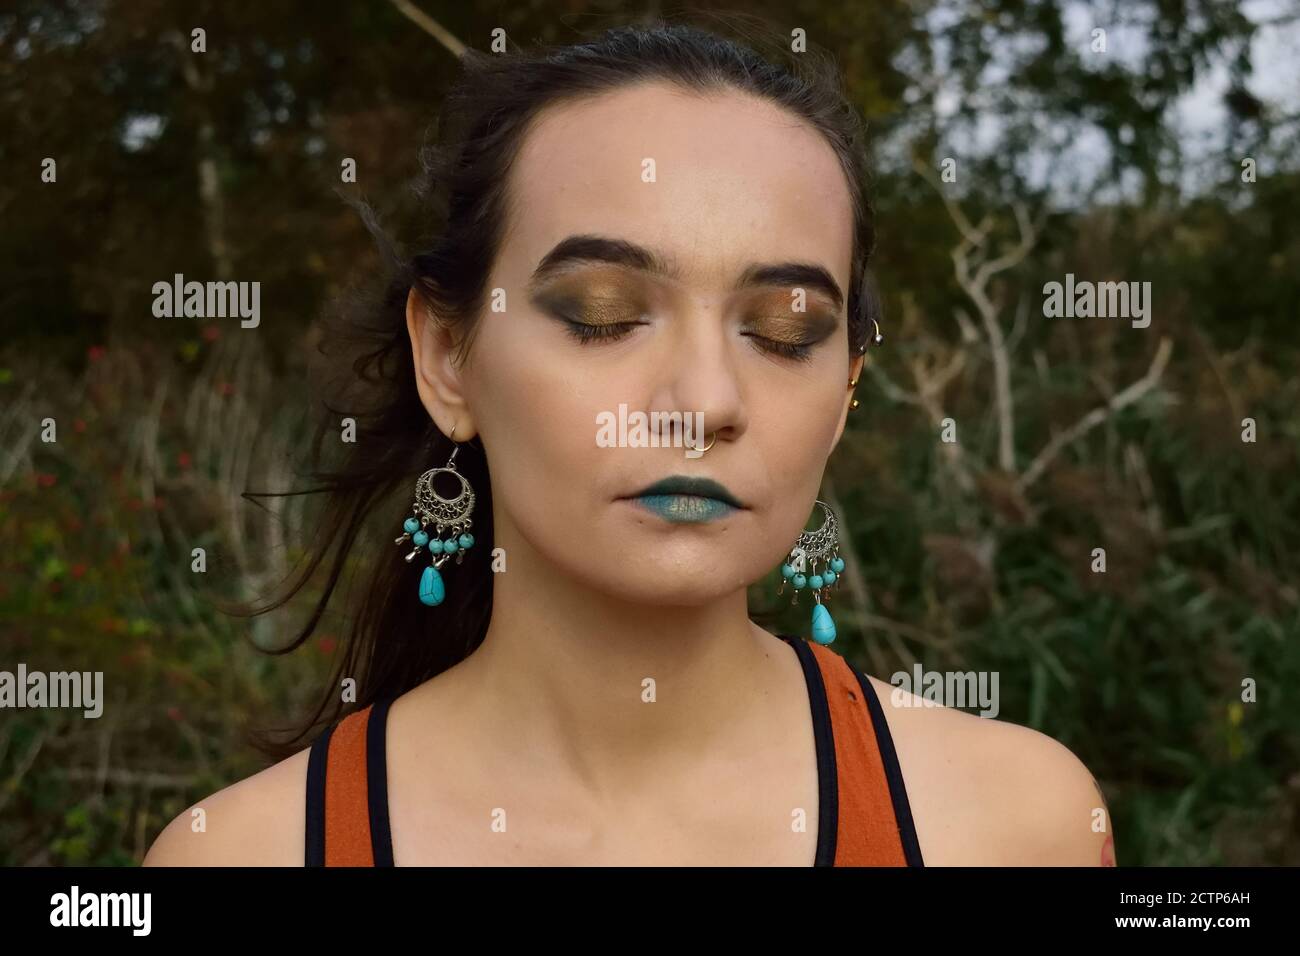 Young Person with Makeup Closing Their Eyes in the Breeze Stock Photo ...